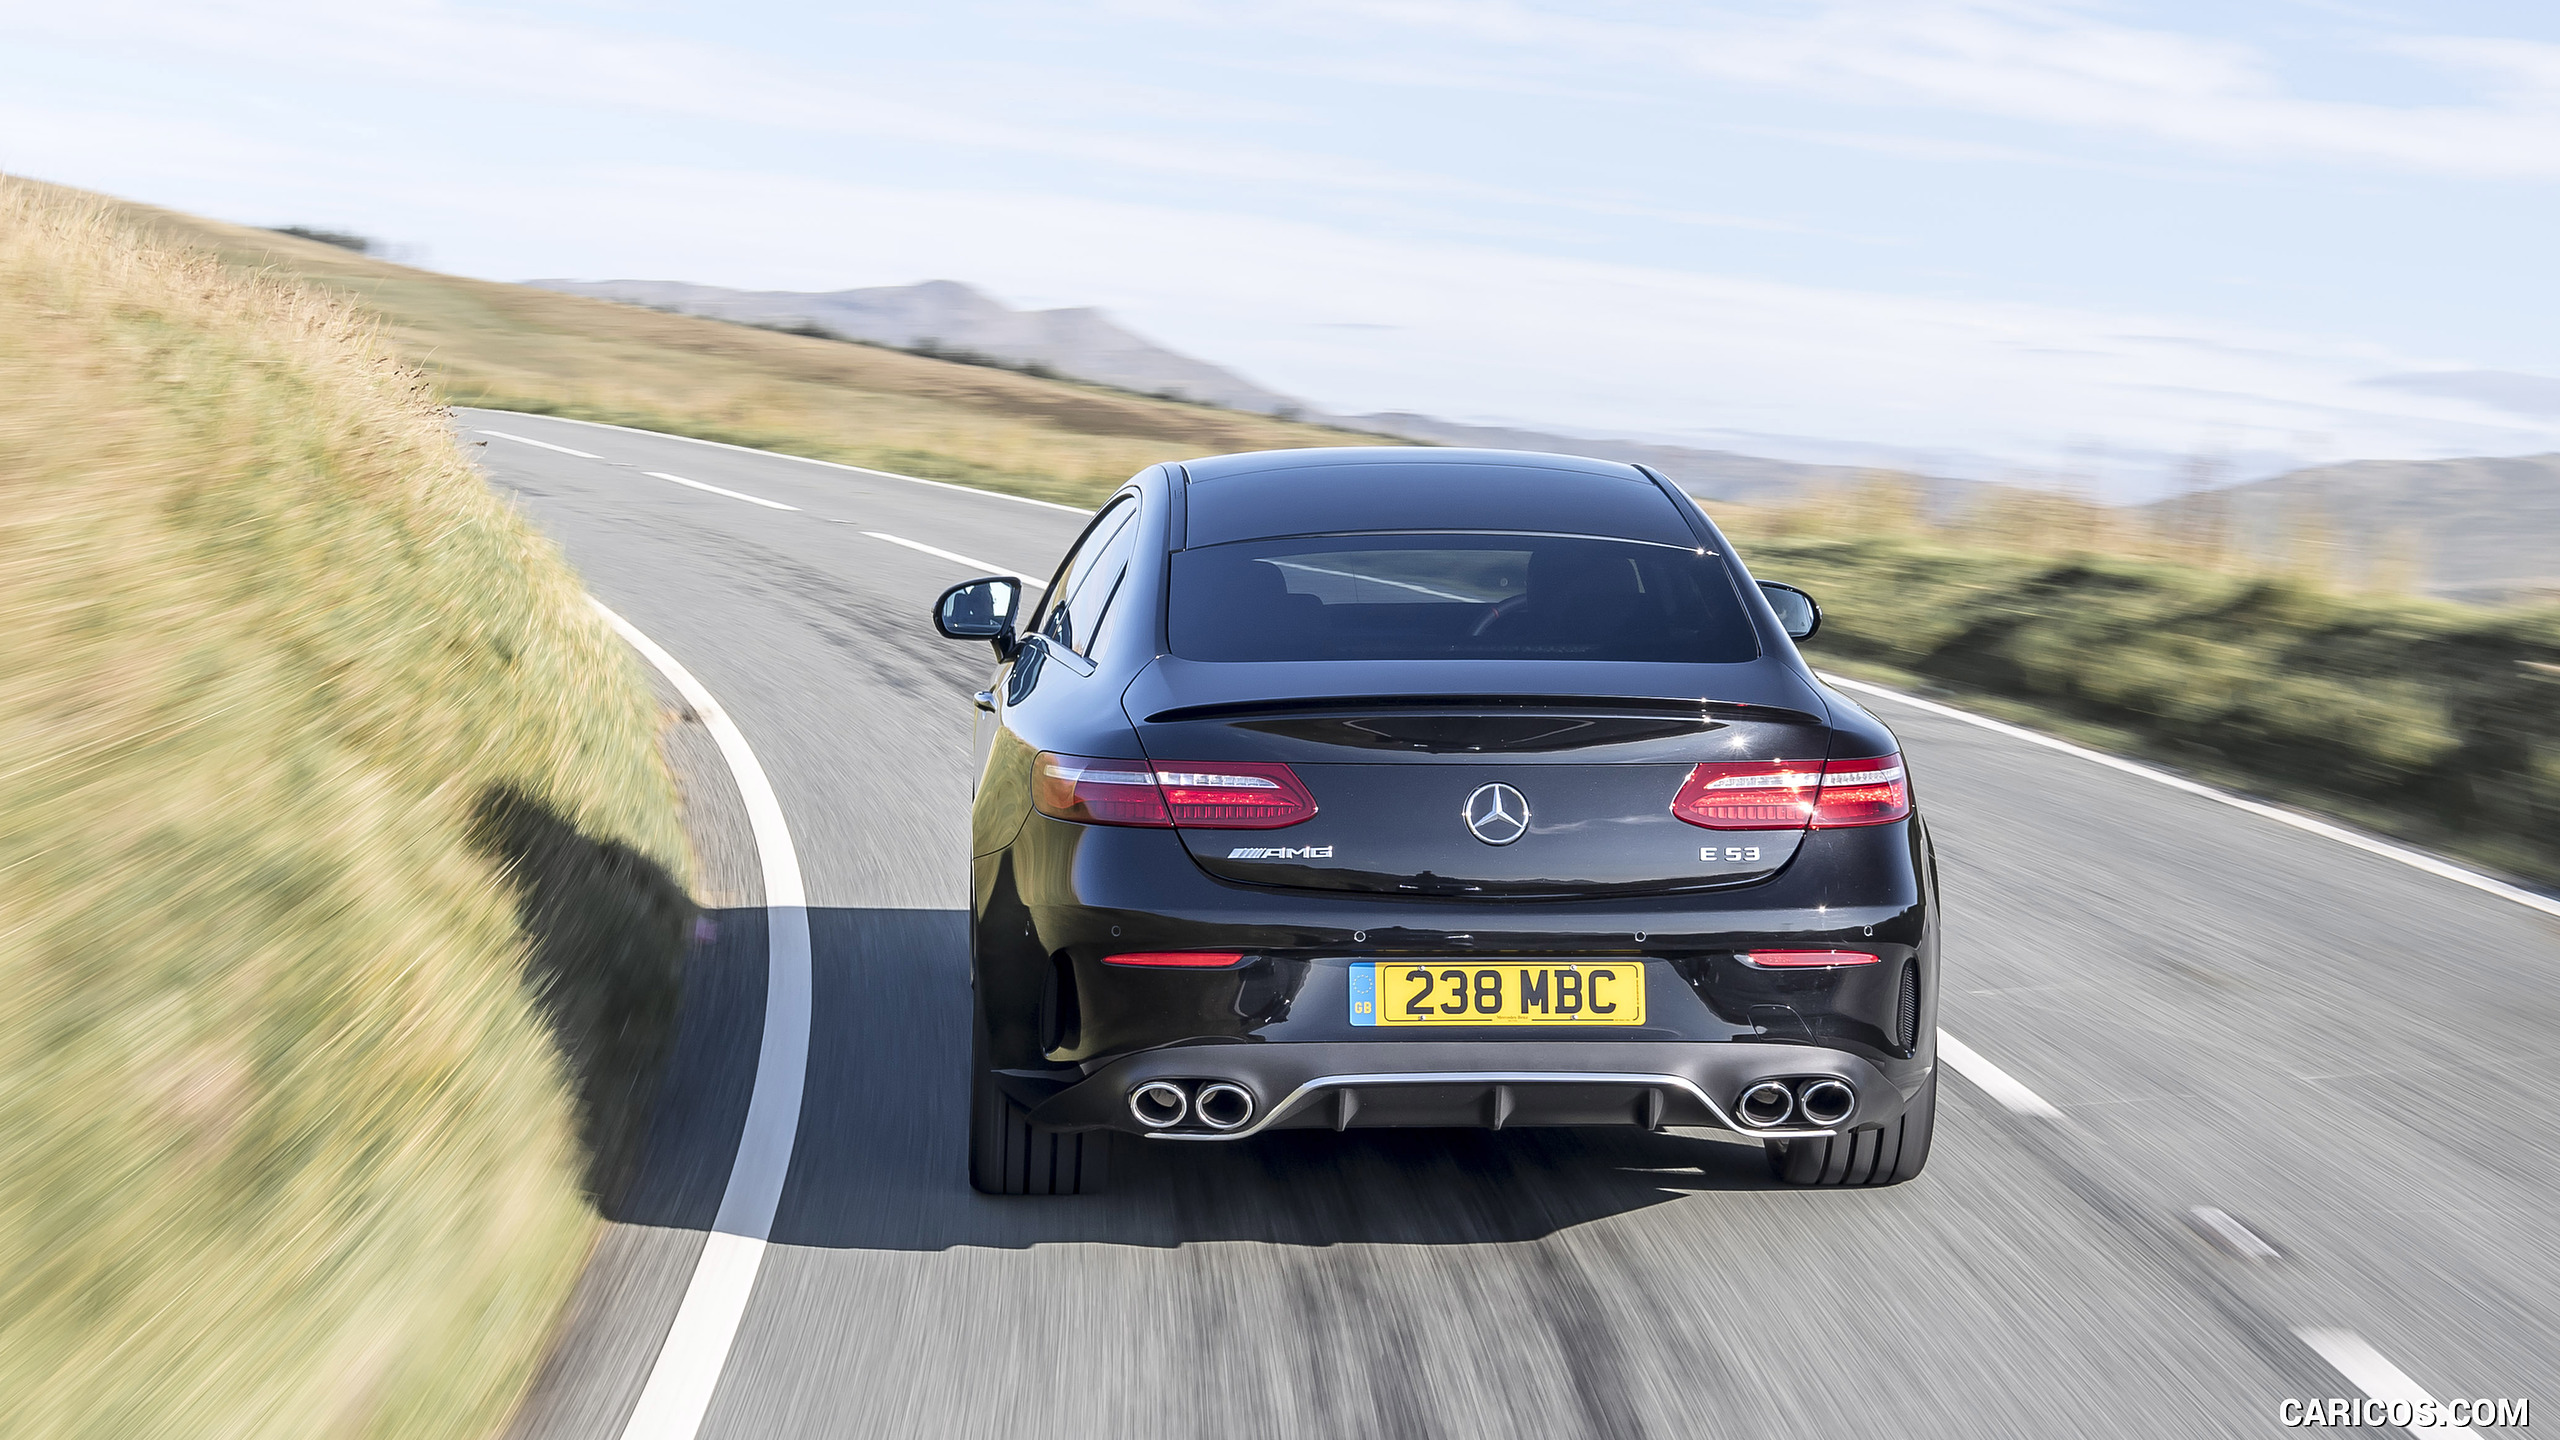 2019 Mercedes-AMG E 53 Coupe (UK-Spec) - Rear, #12 of 166